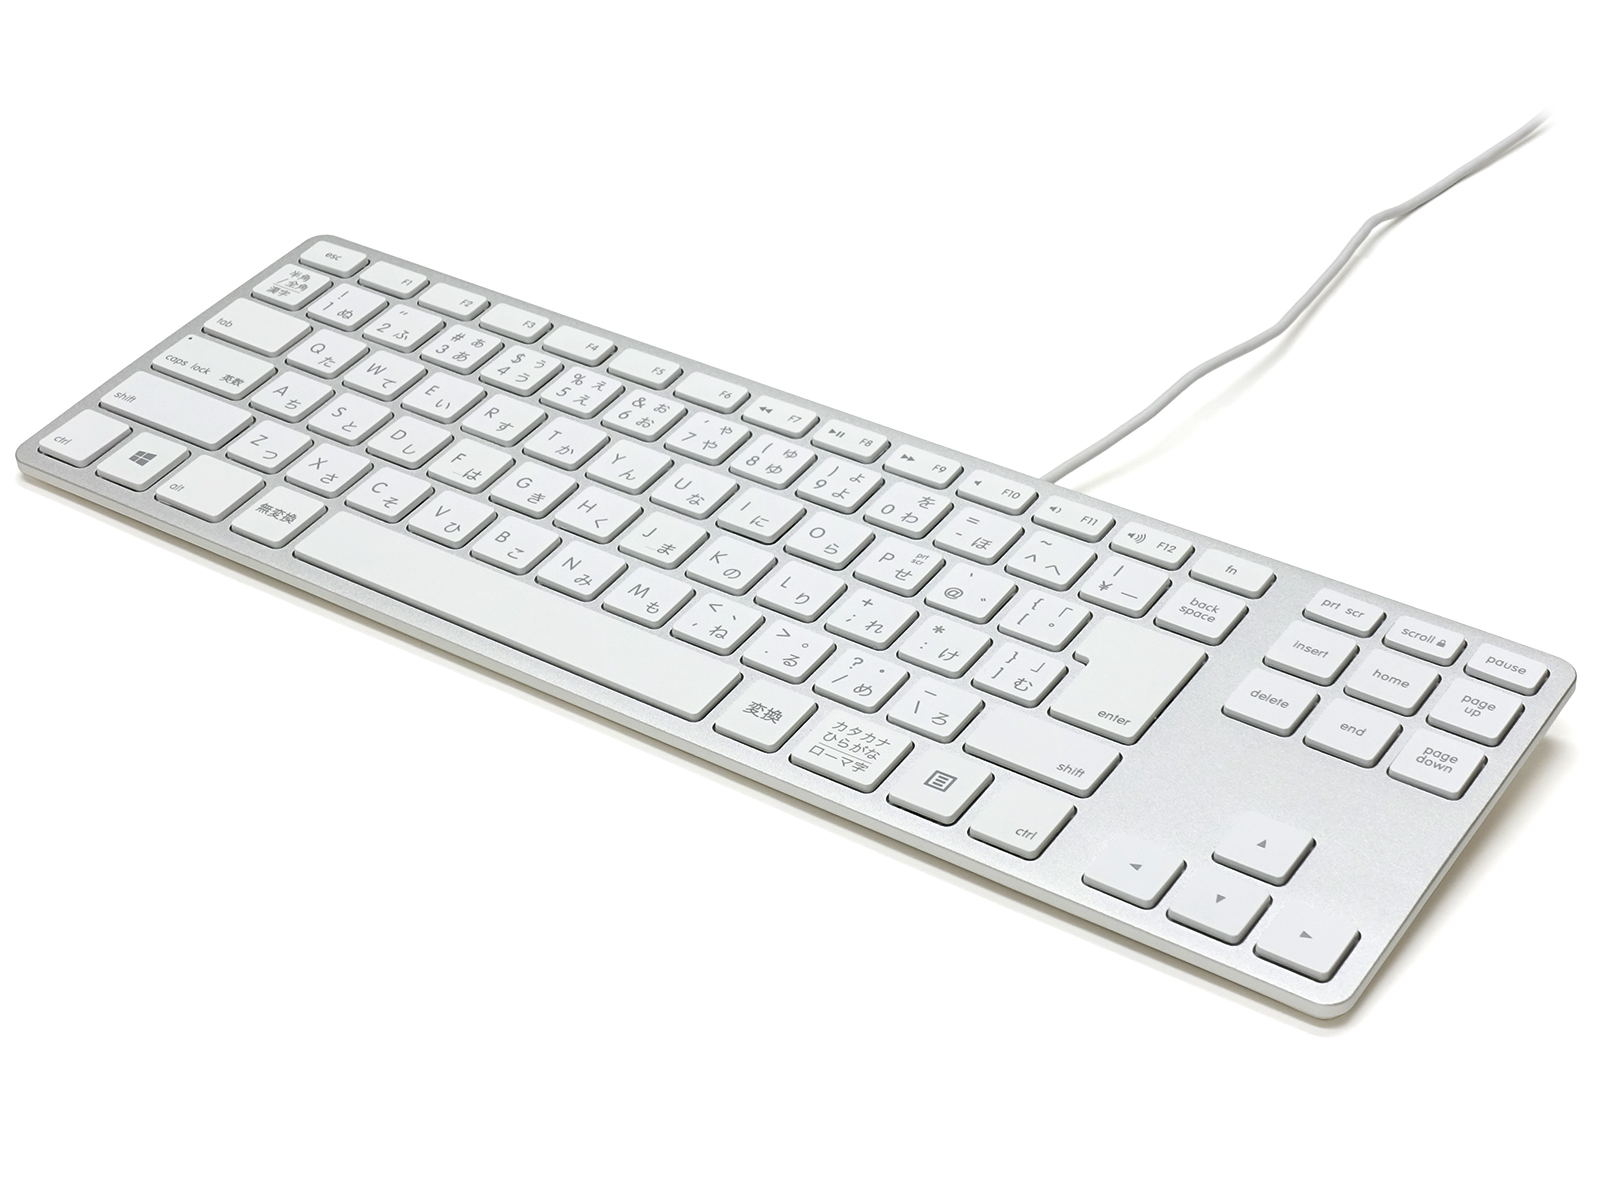 Matias Wired Aluminum Tenkeyless keyboard for PC: image 6 of 6 thumb